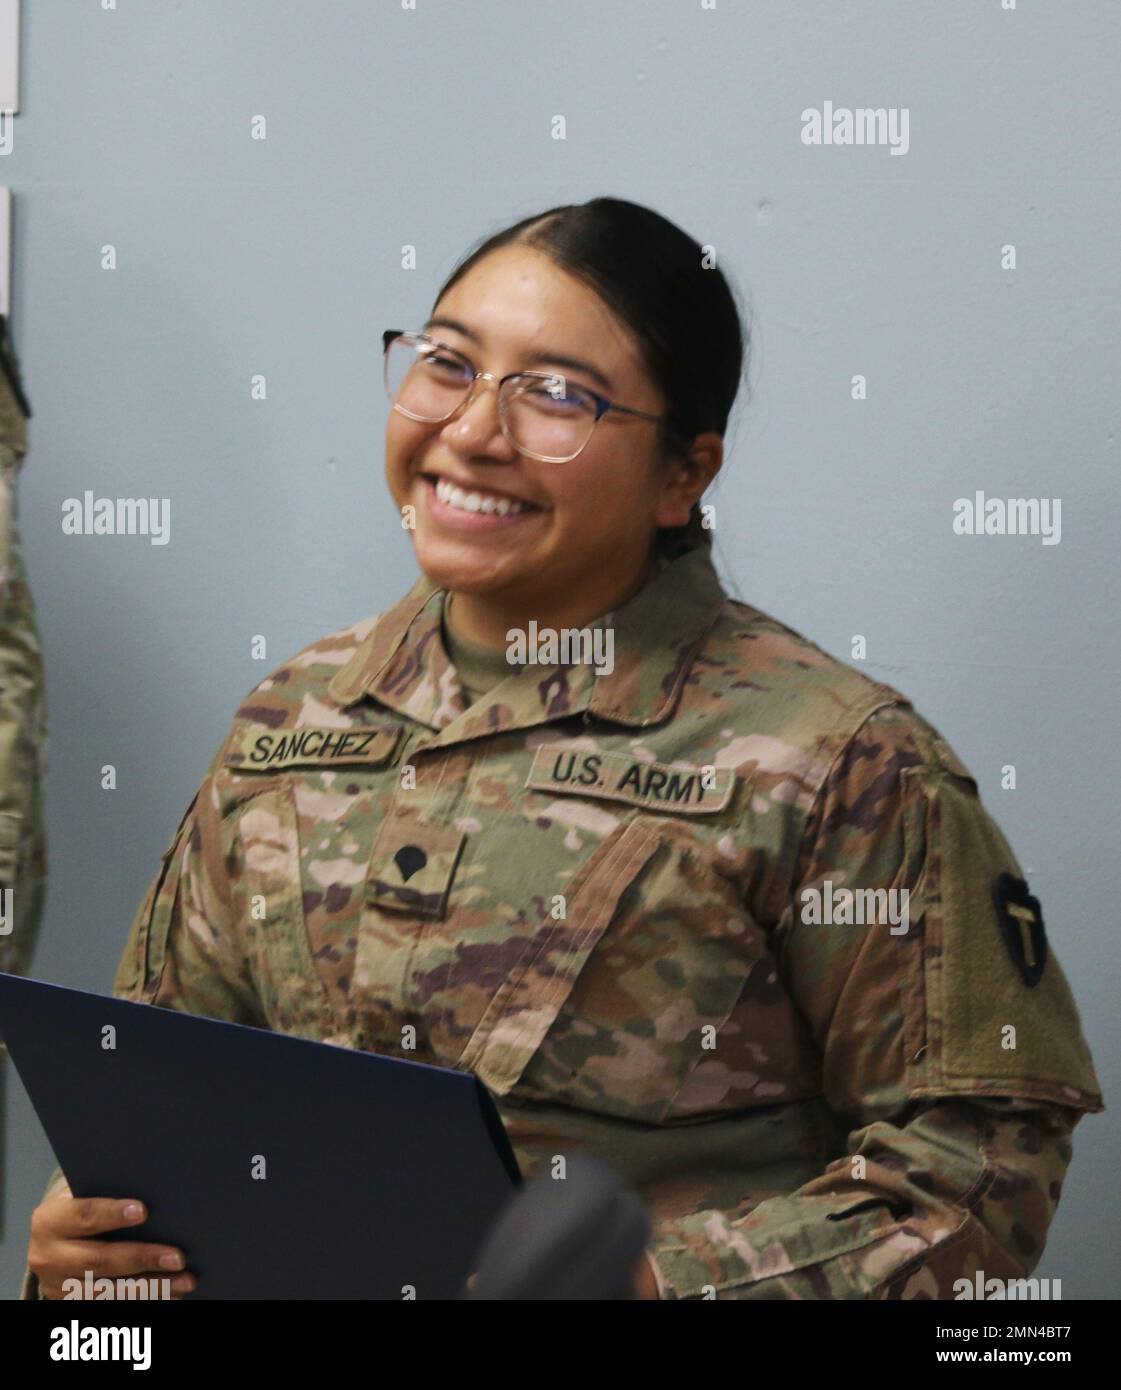 U.S. Army Spc. Jennifer M. Sanchez, Property Book NCO, 92Y, for Headquarters and Headquarters Company, 36th Combat Aviation Brigade, "Task Force Mustang," 36th Infantry Division, receives Certificate of Appreciation as the brigade's "Hero of the Week" during a command and staff meeting held at Task Force Mustang headquarters, Camp Buehring, Kuwait, Sept. 28, 2022. Sanchez, a native of Nacogdoches, Texas, was recognized for her stellar performance and administrative excellence in overseeing quality control measures for the brigade's monthly inventory audits. Stock Photo